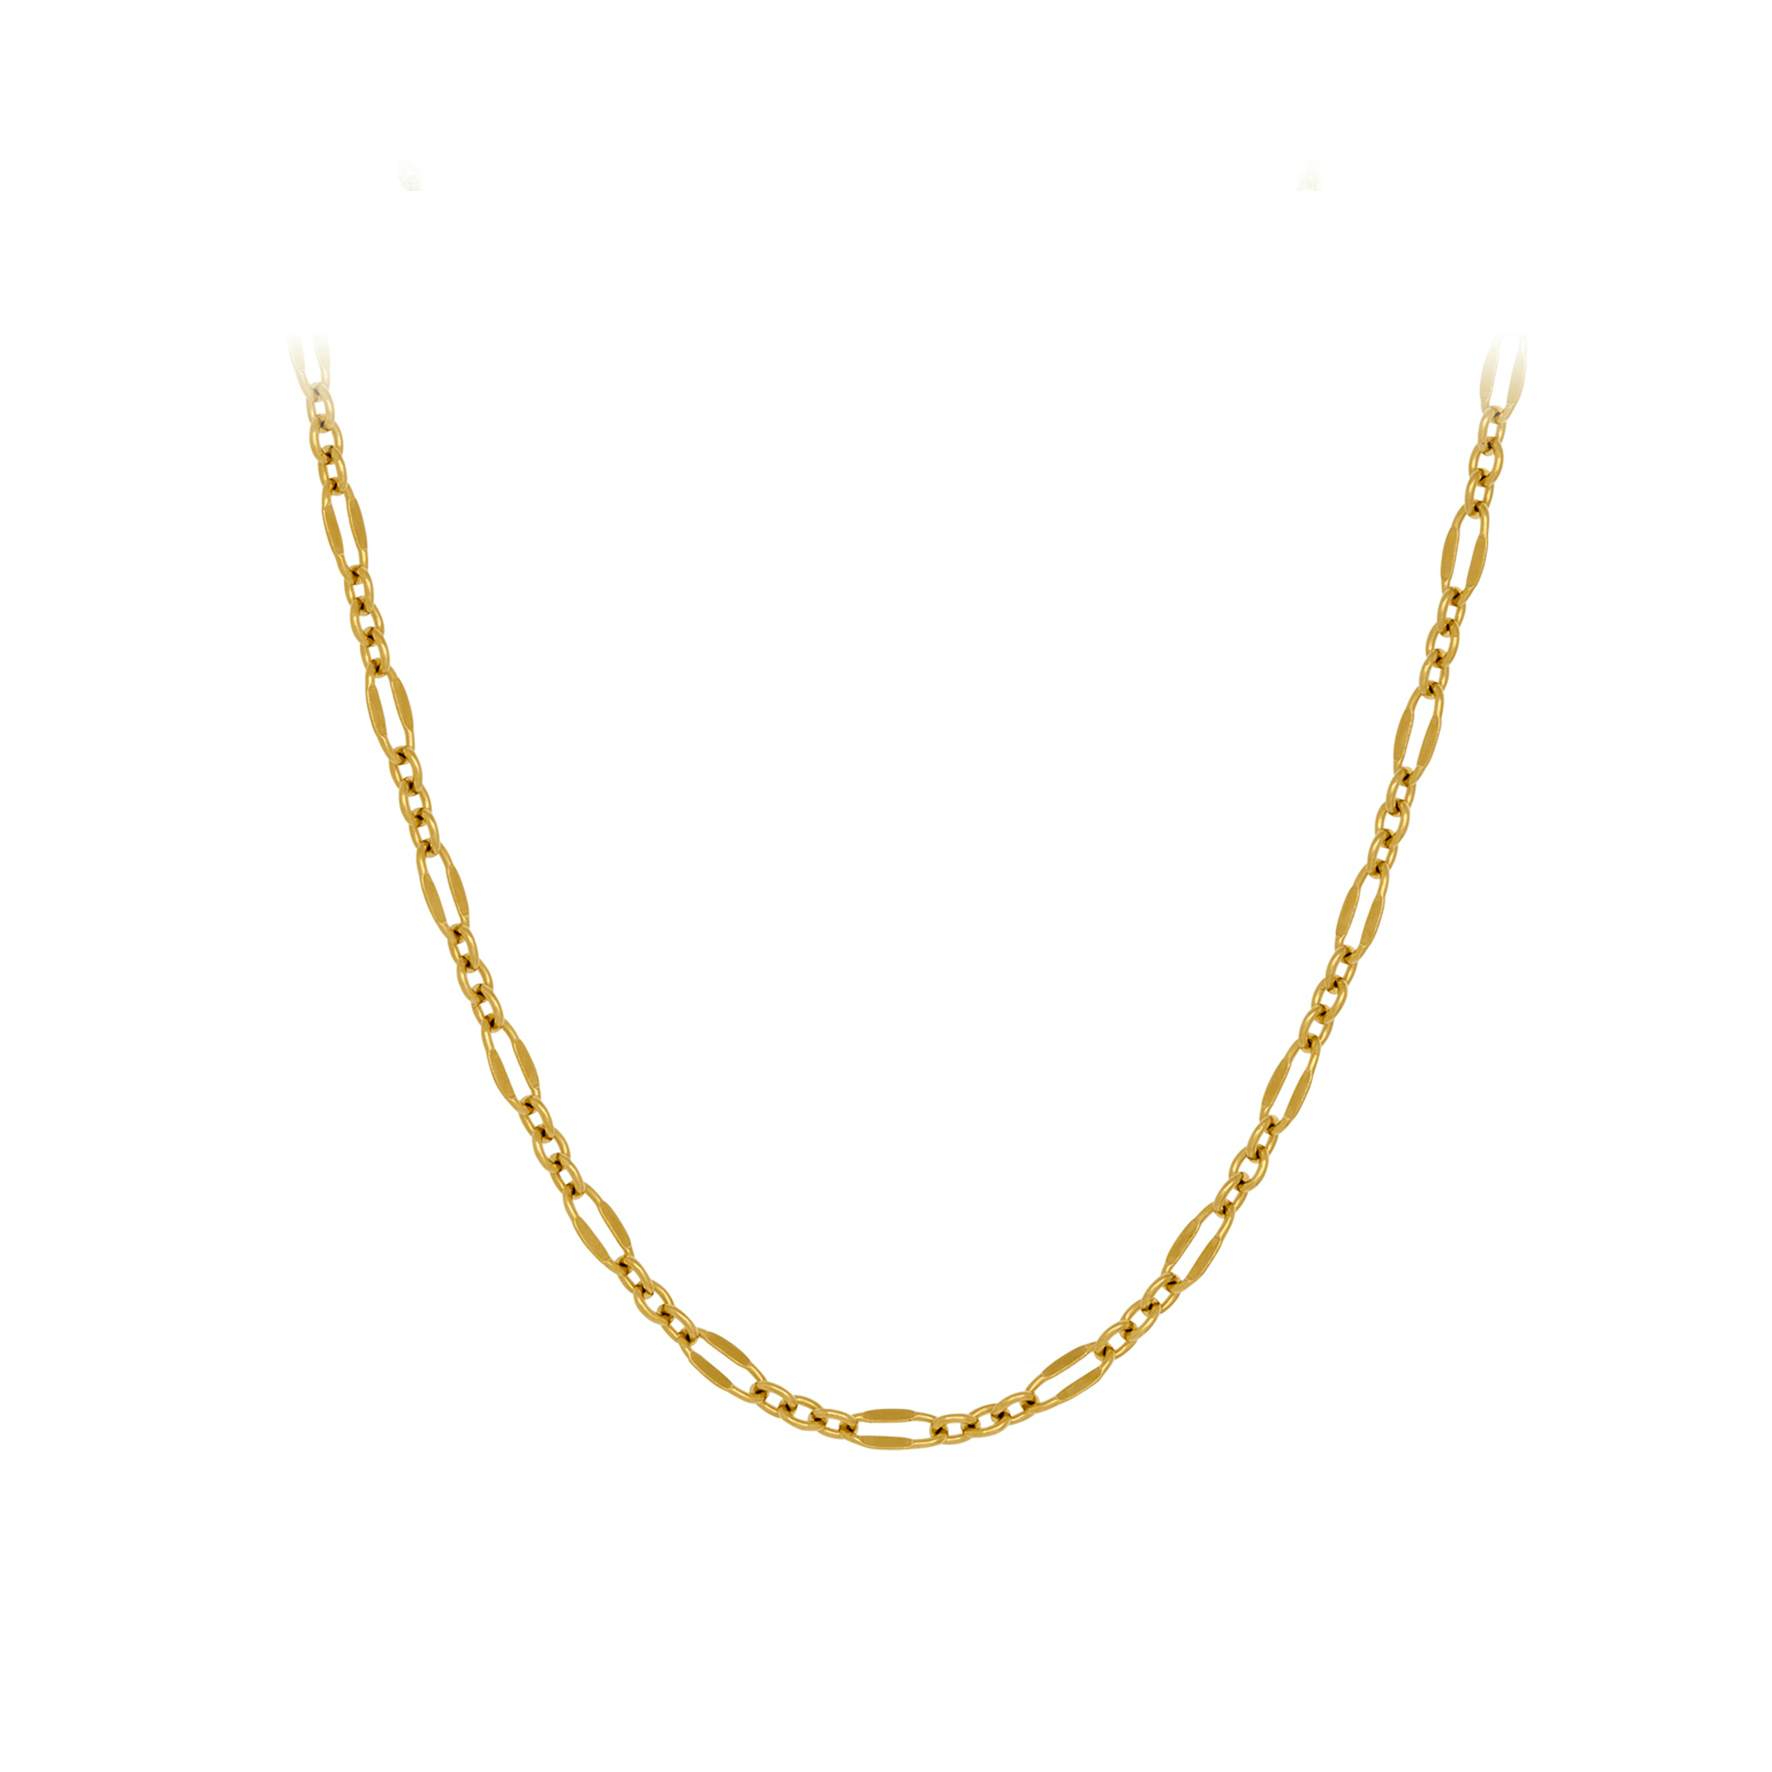 Eden Necklace from Pernille Corydon in Goldplated-Silver Sterling 925